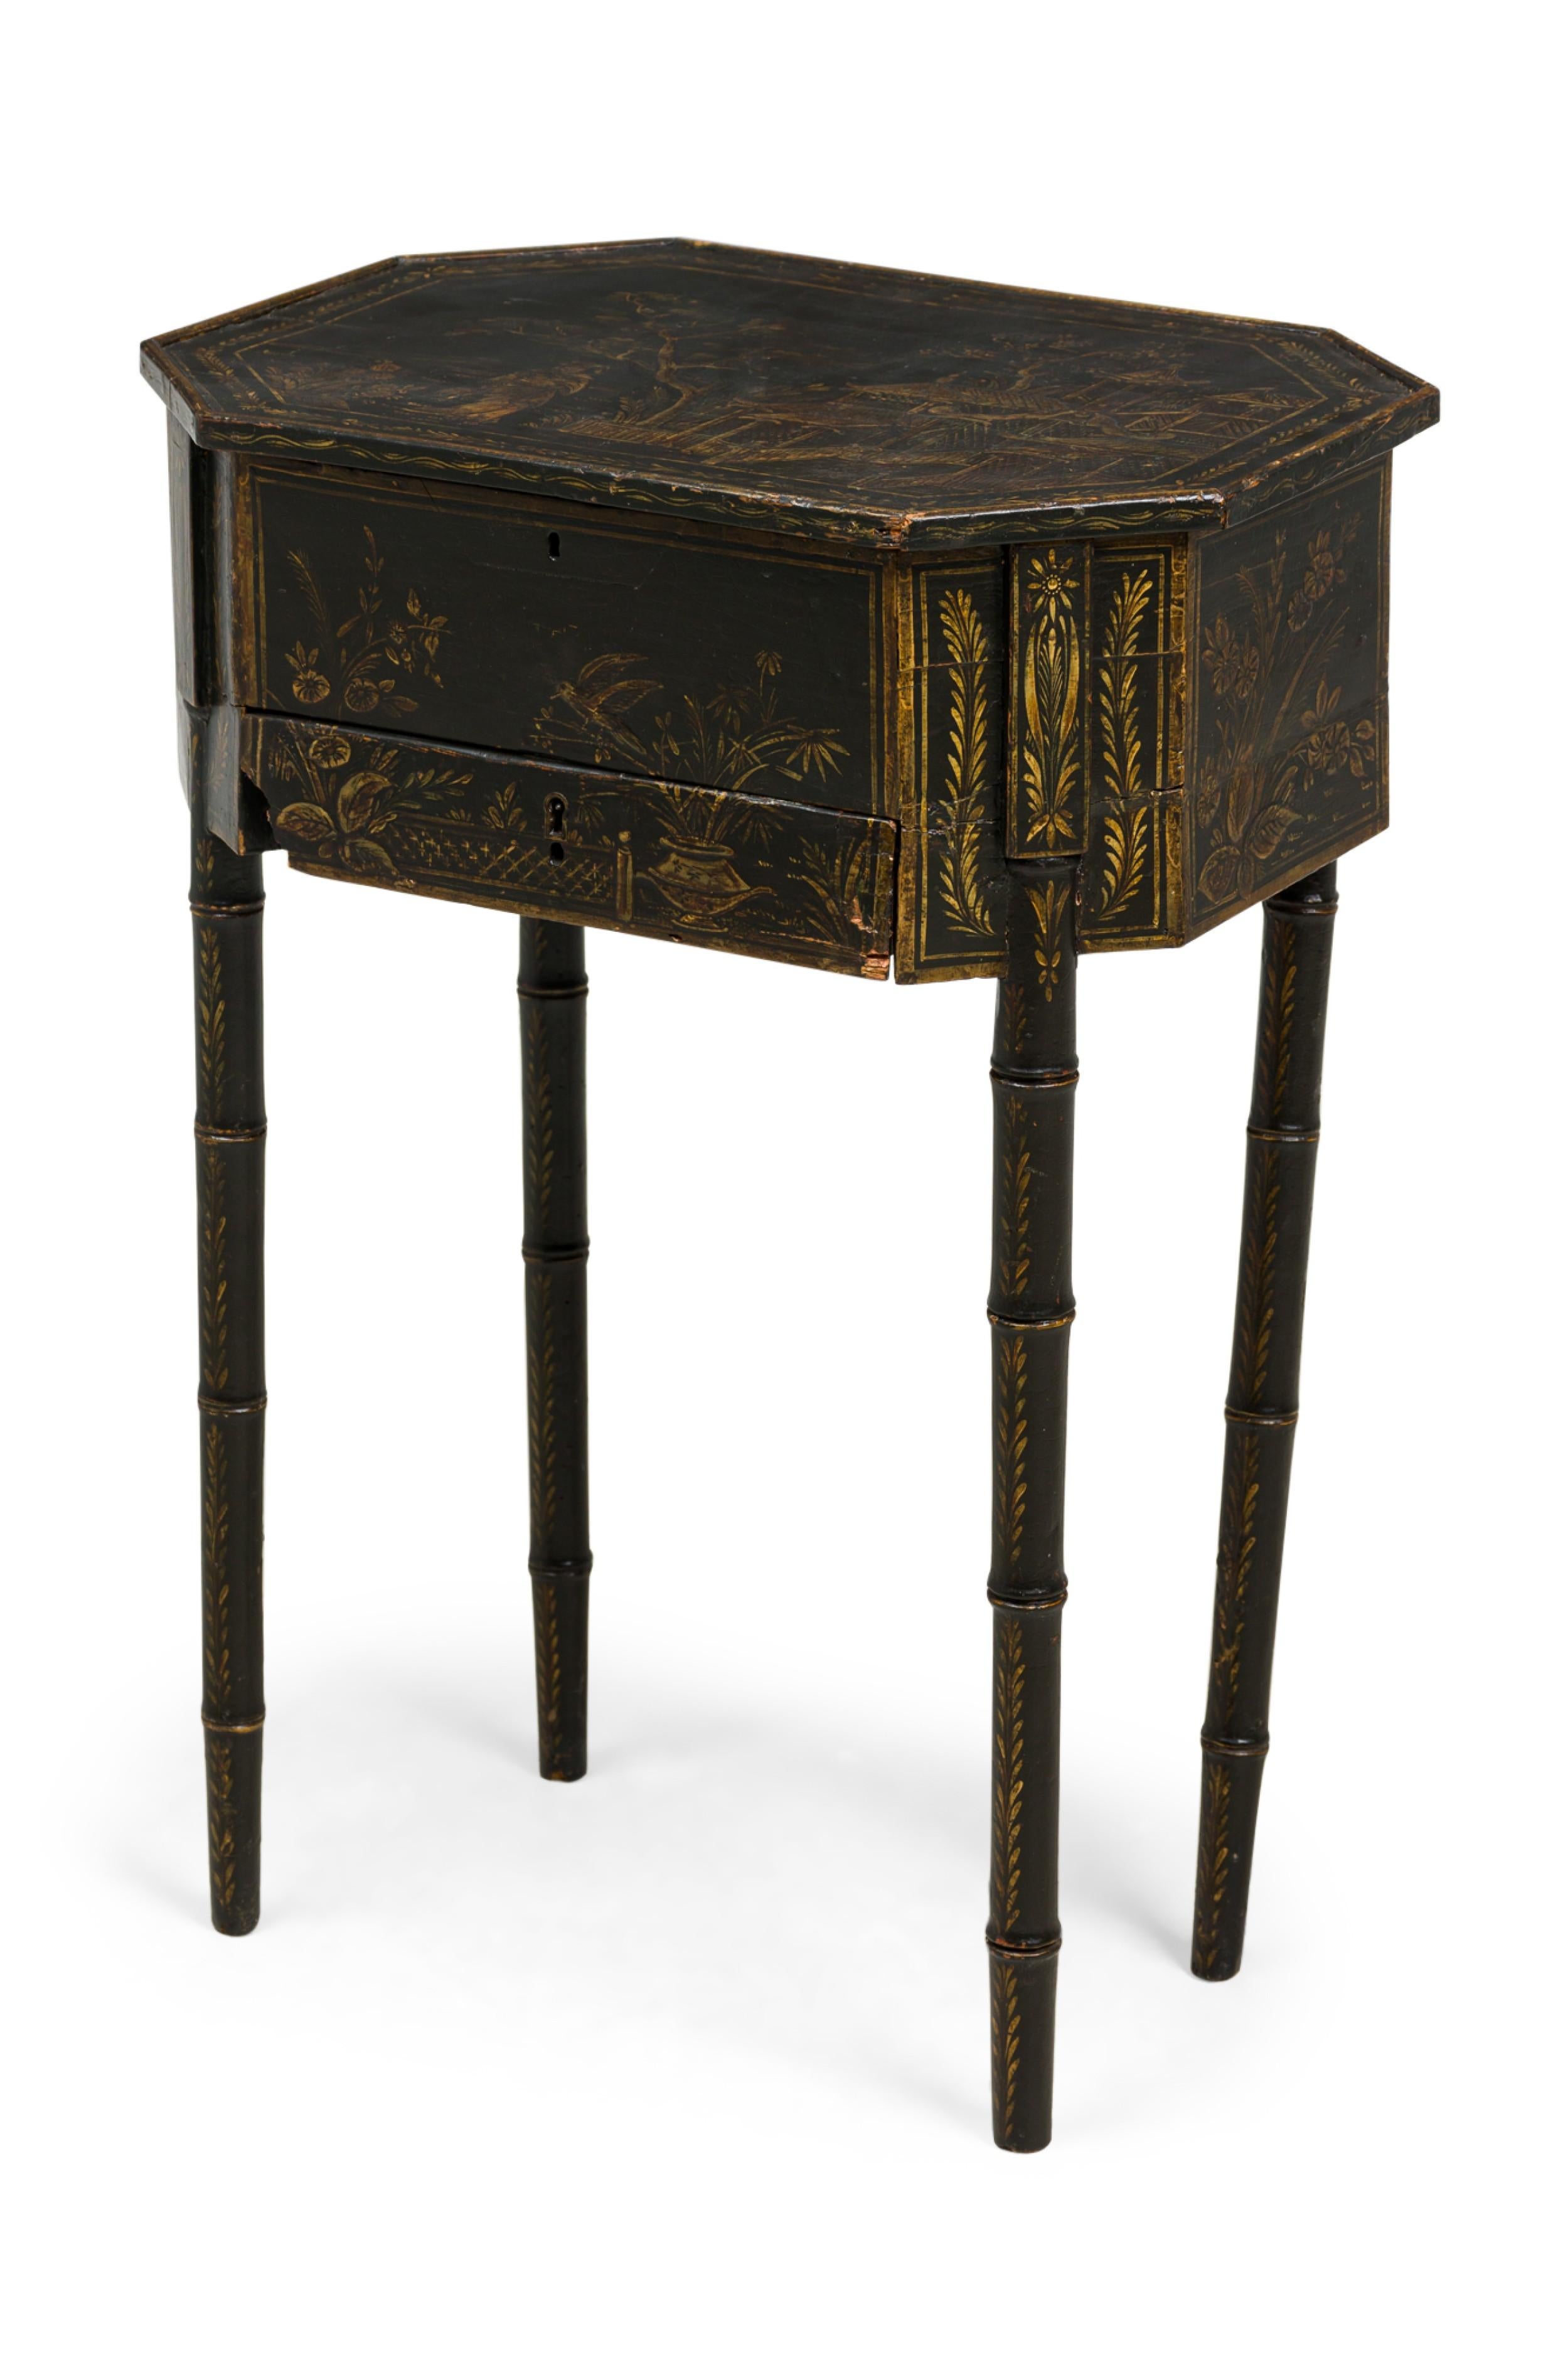 English George III Black Japanned work / end / side table with an elongated hexagonal cabinet, having a lid decorated with a gilt genre scene which opens on hinges to reveal an open interior compartment above two lower drawers, resting on four faux